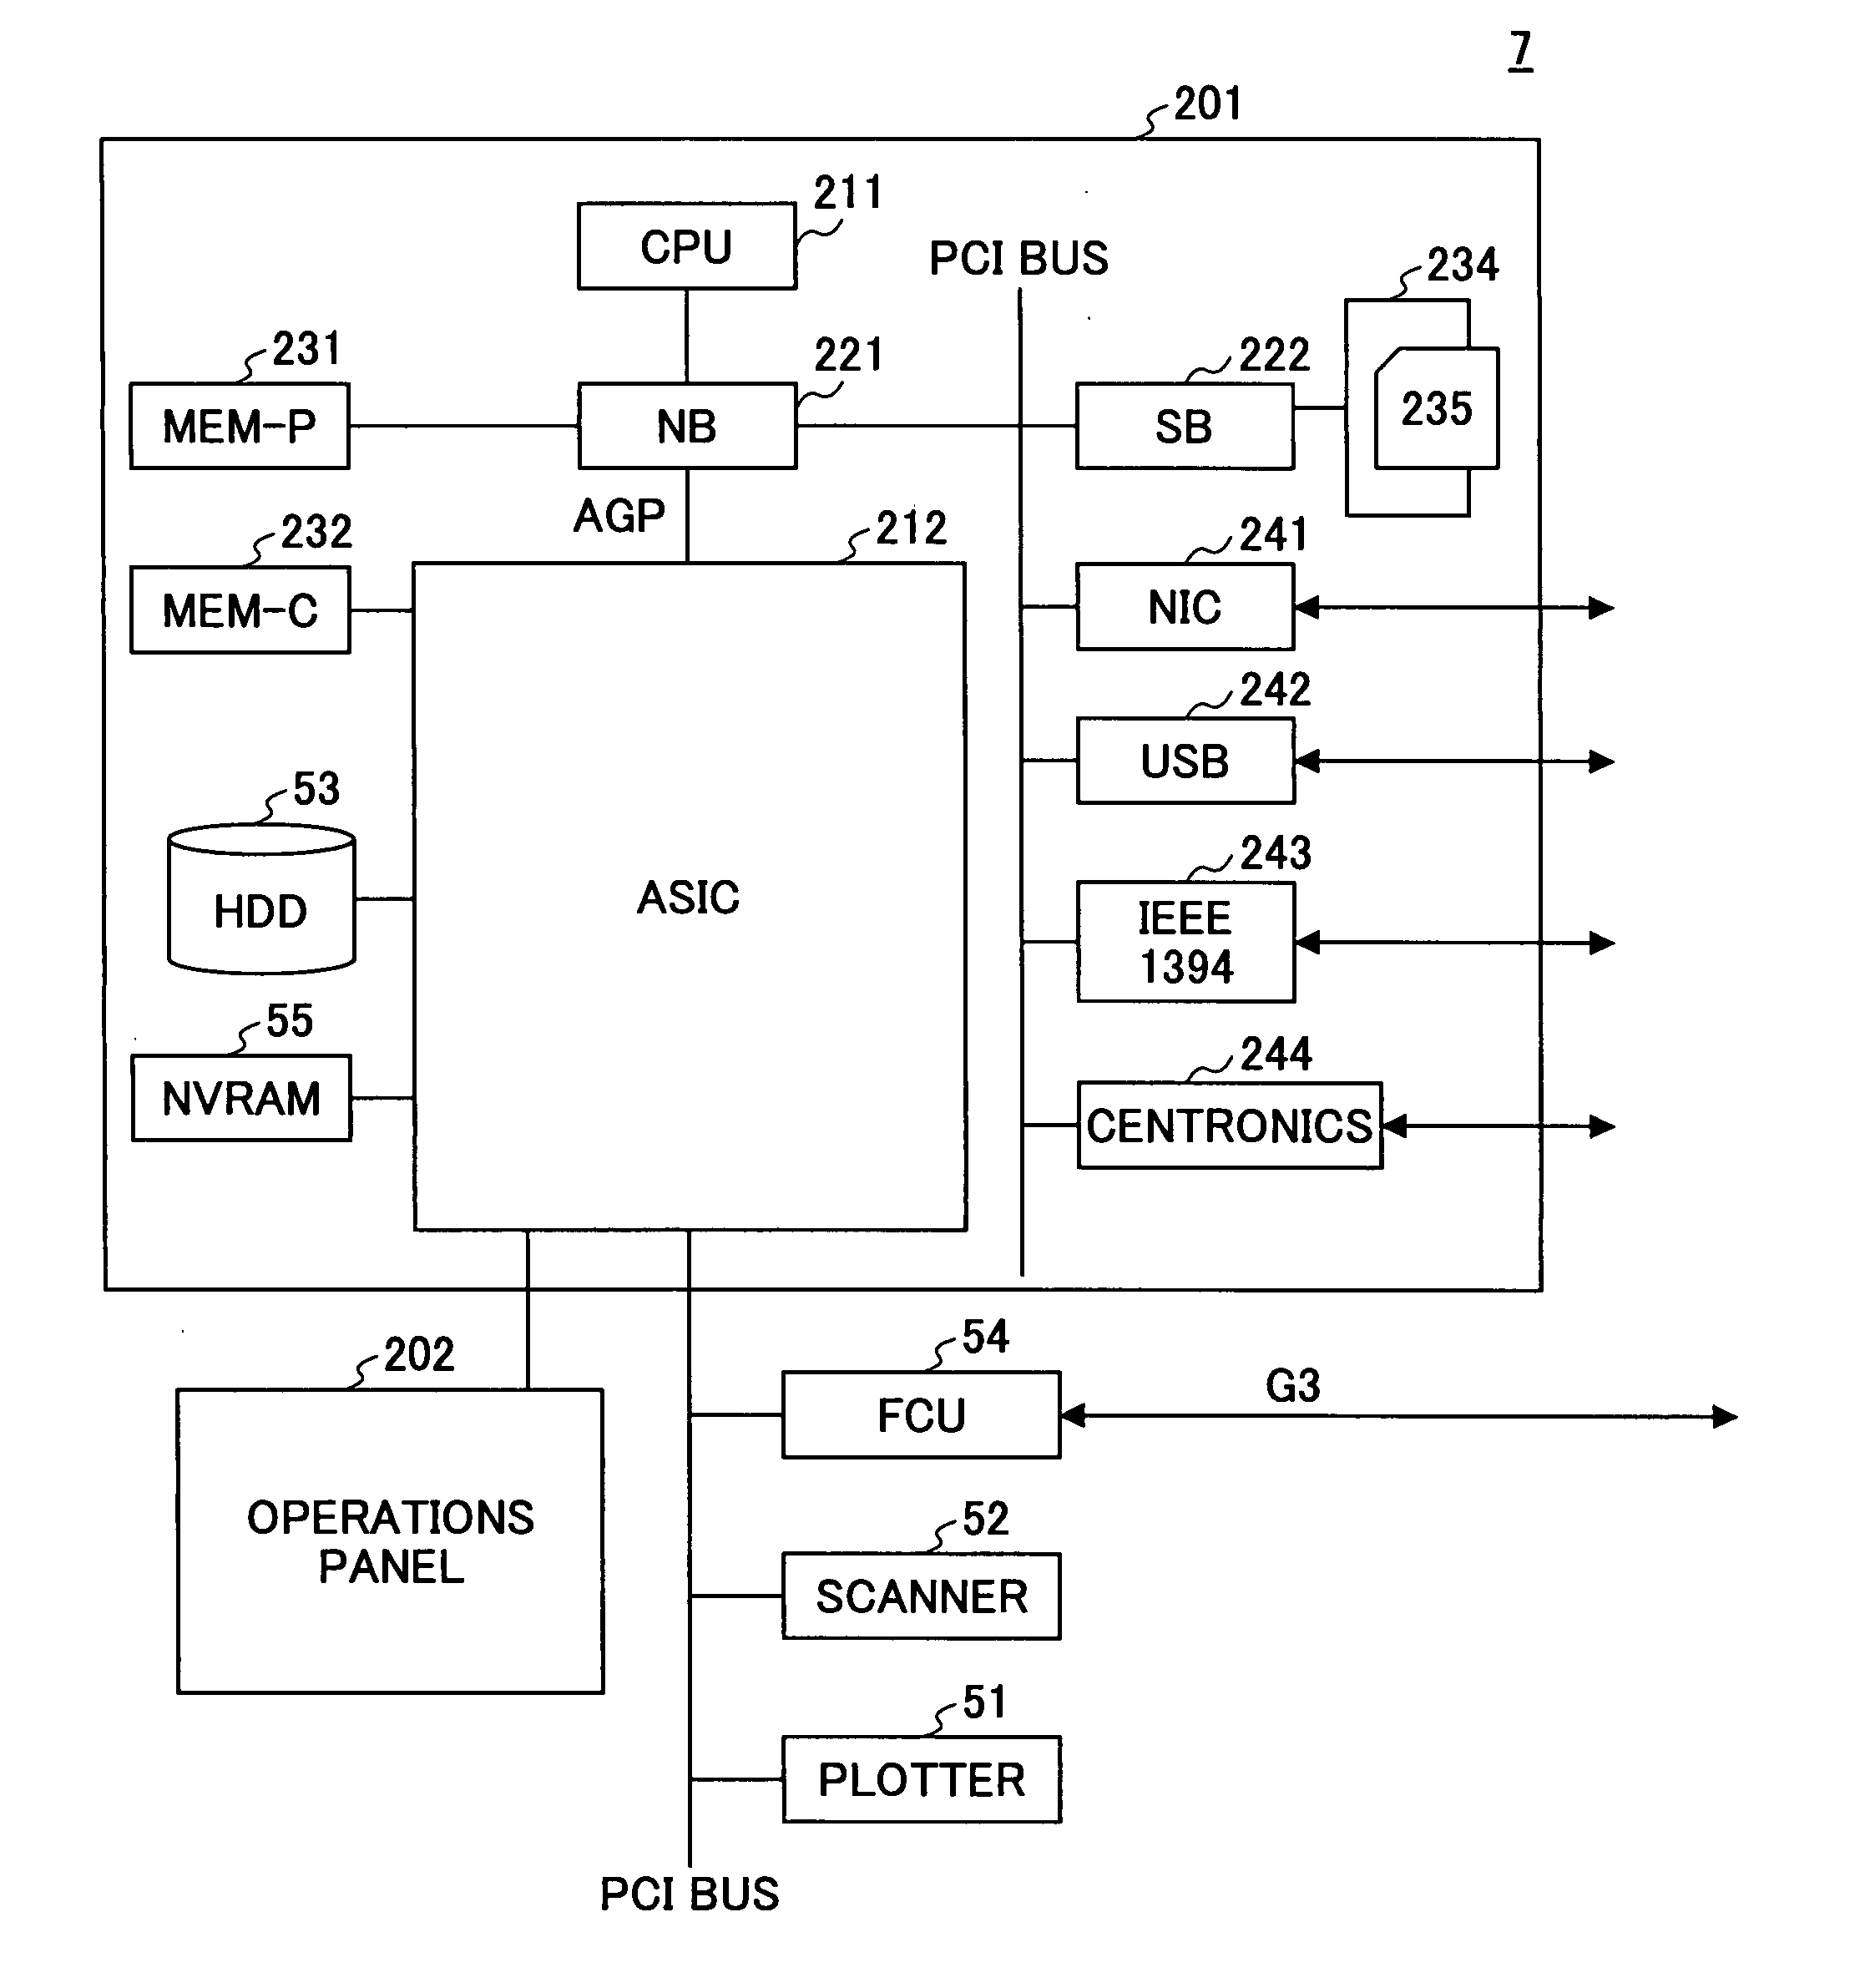 Image forming apparatus capable of managing configuration information of multiple modules